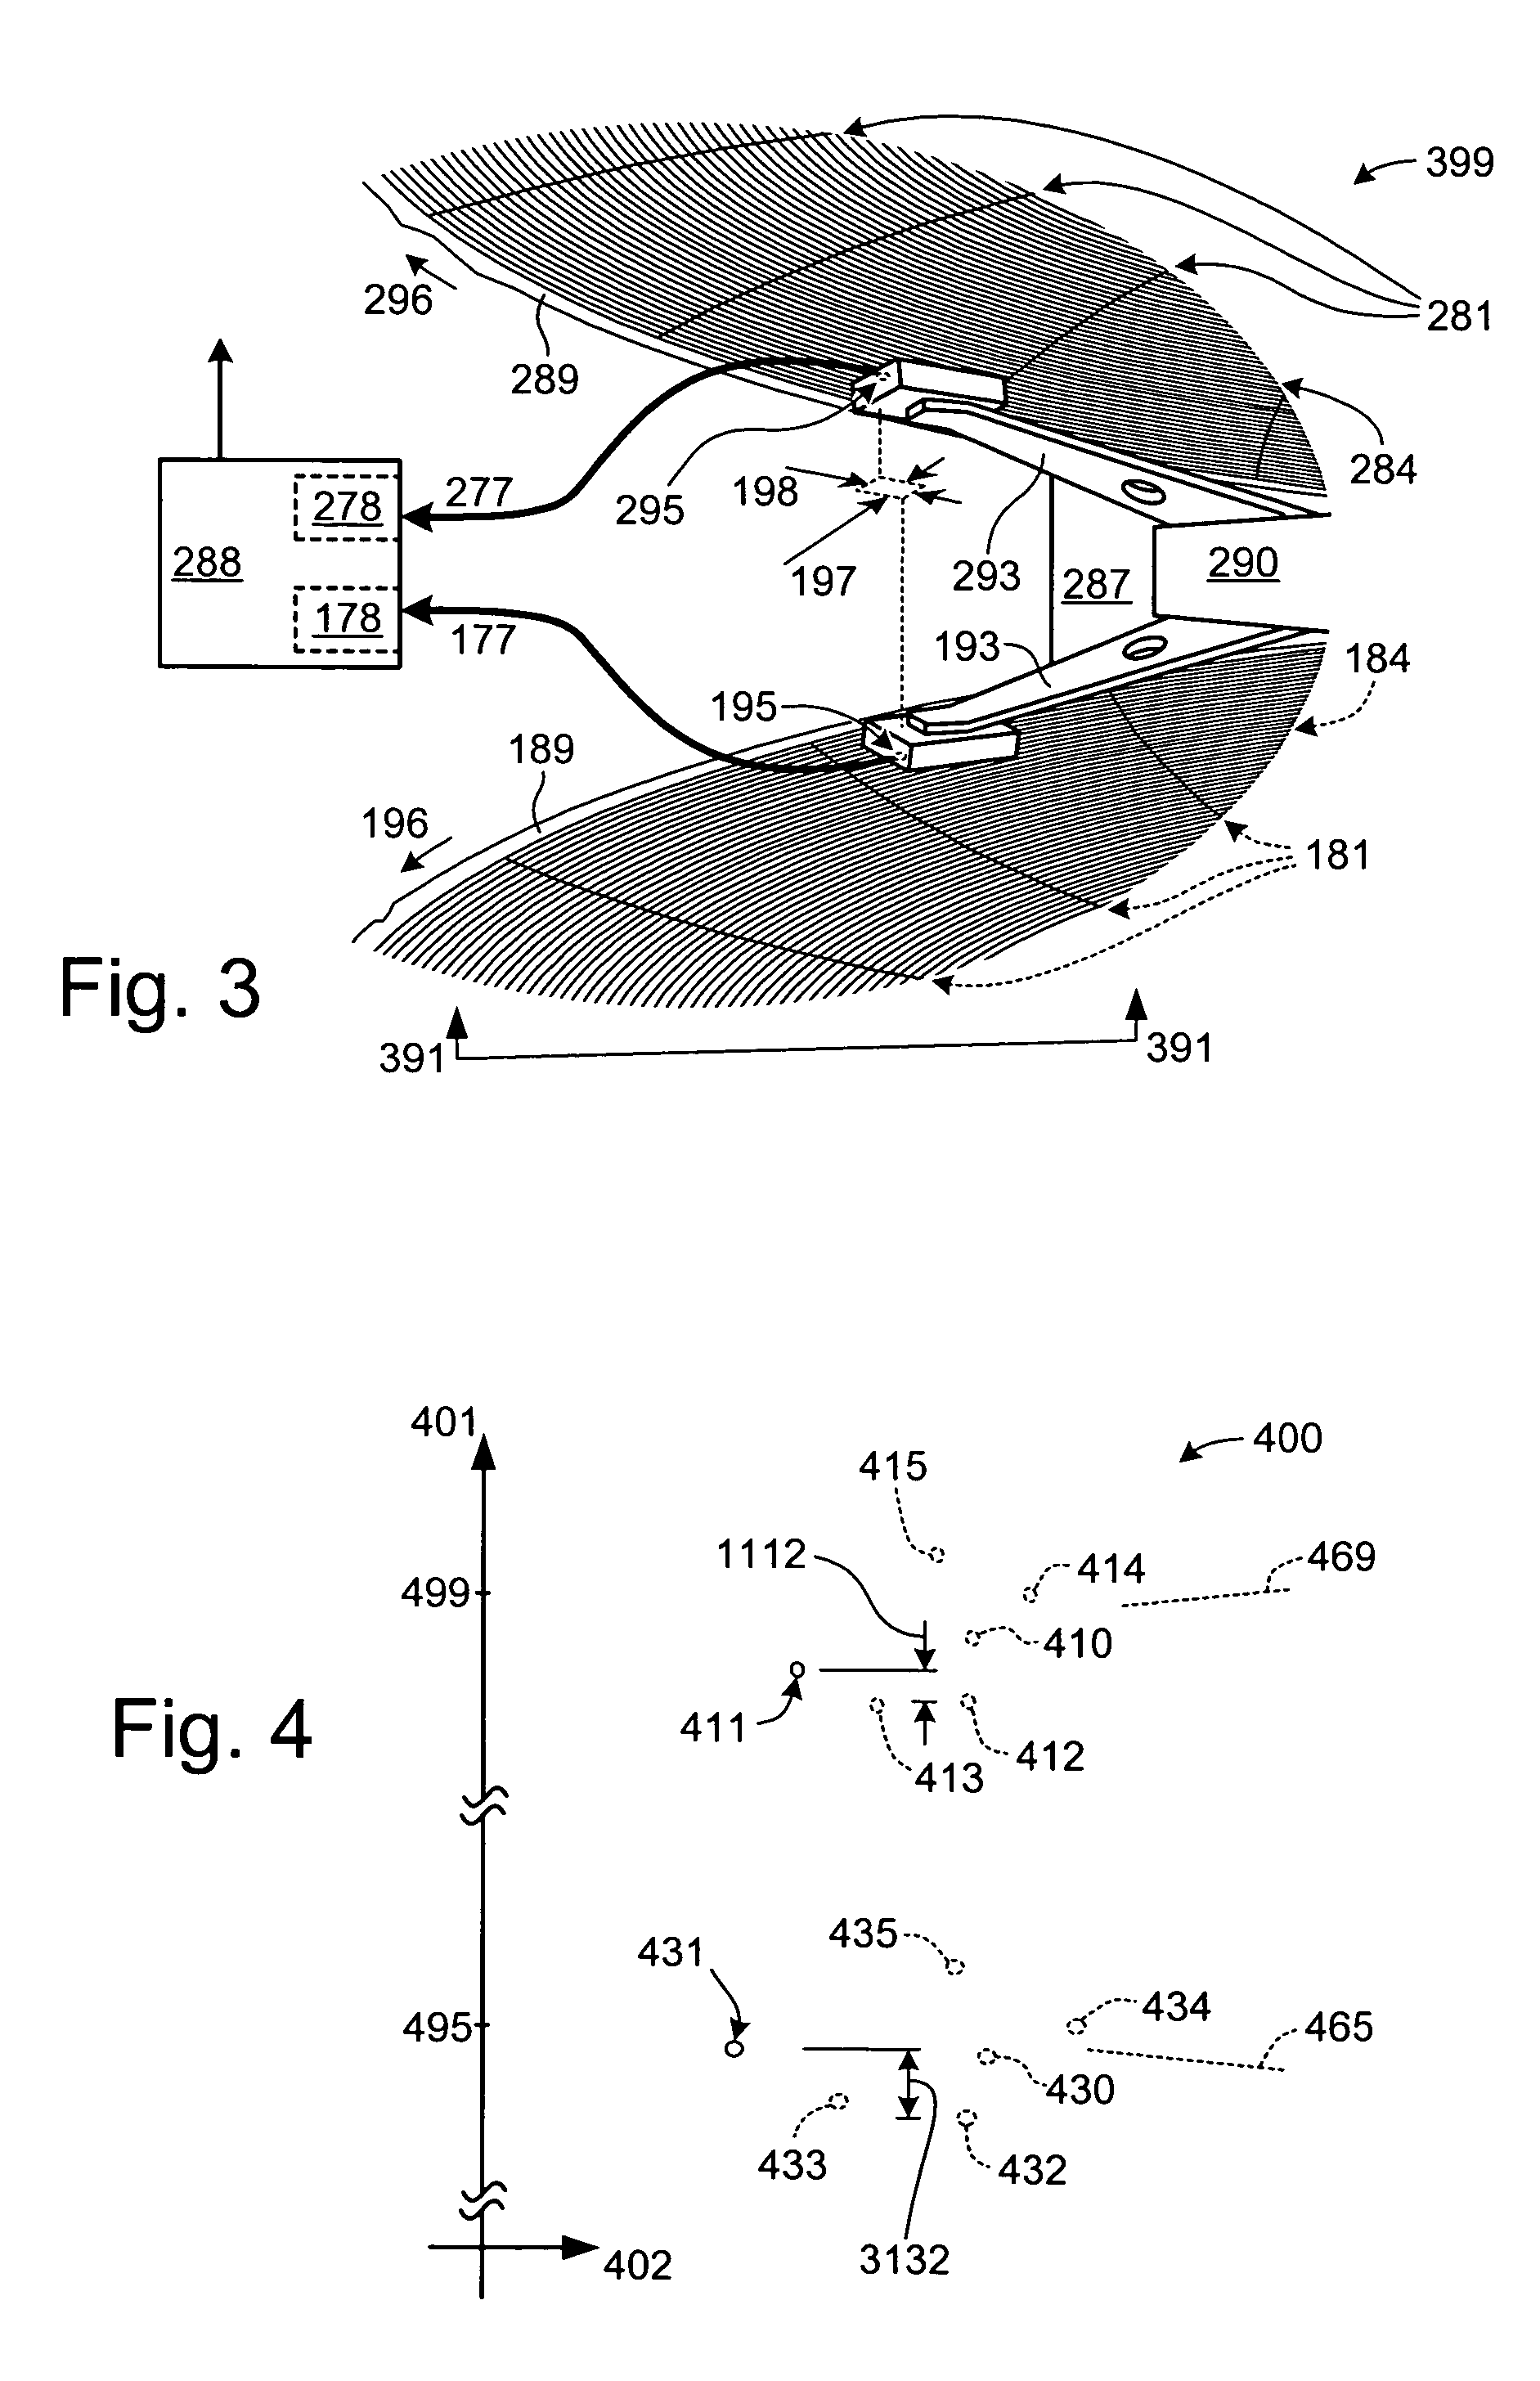 Logical mapping for improved head switching between corresponding tracks in a data handling device